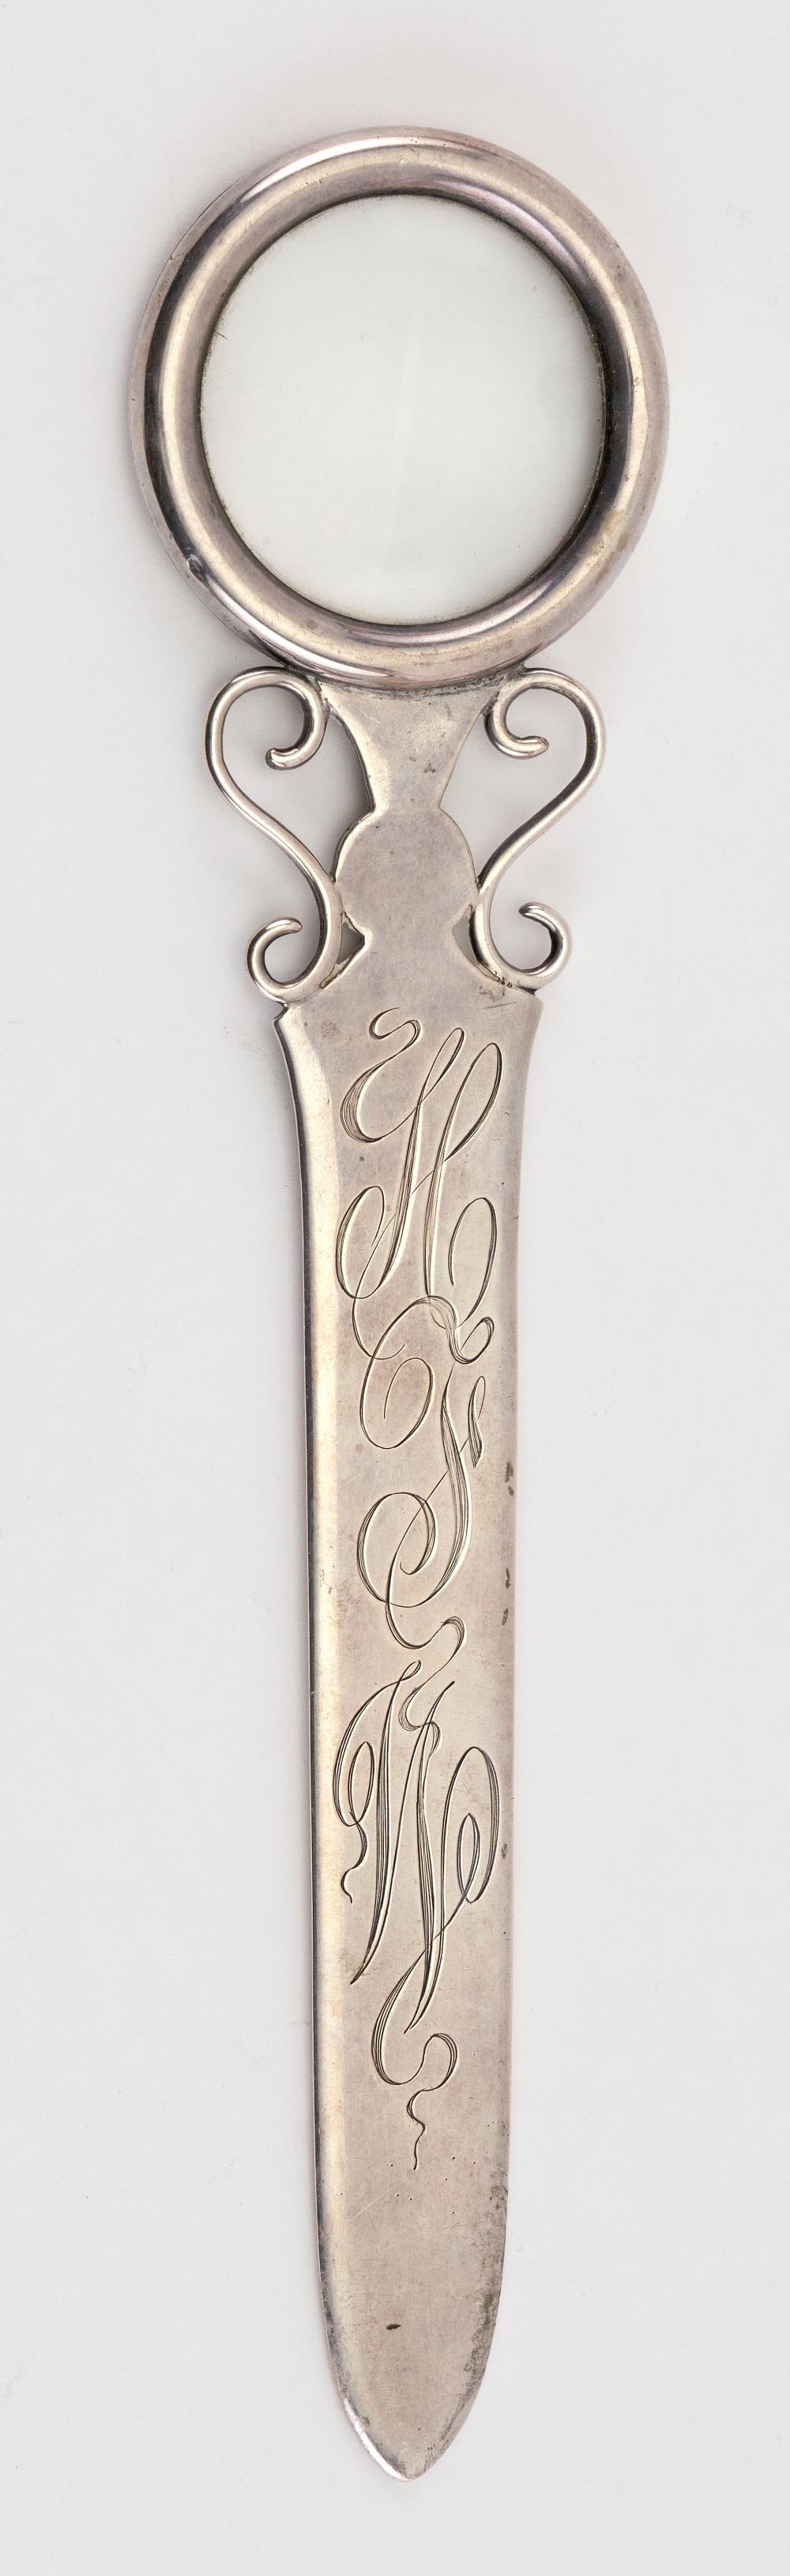 MARCUS & CO. STERLING SILVER LETTER